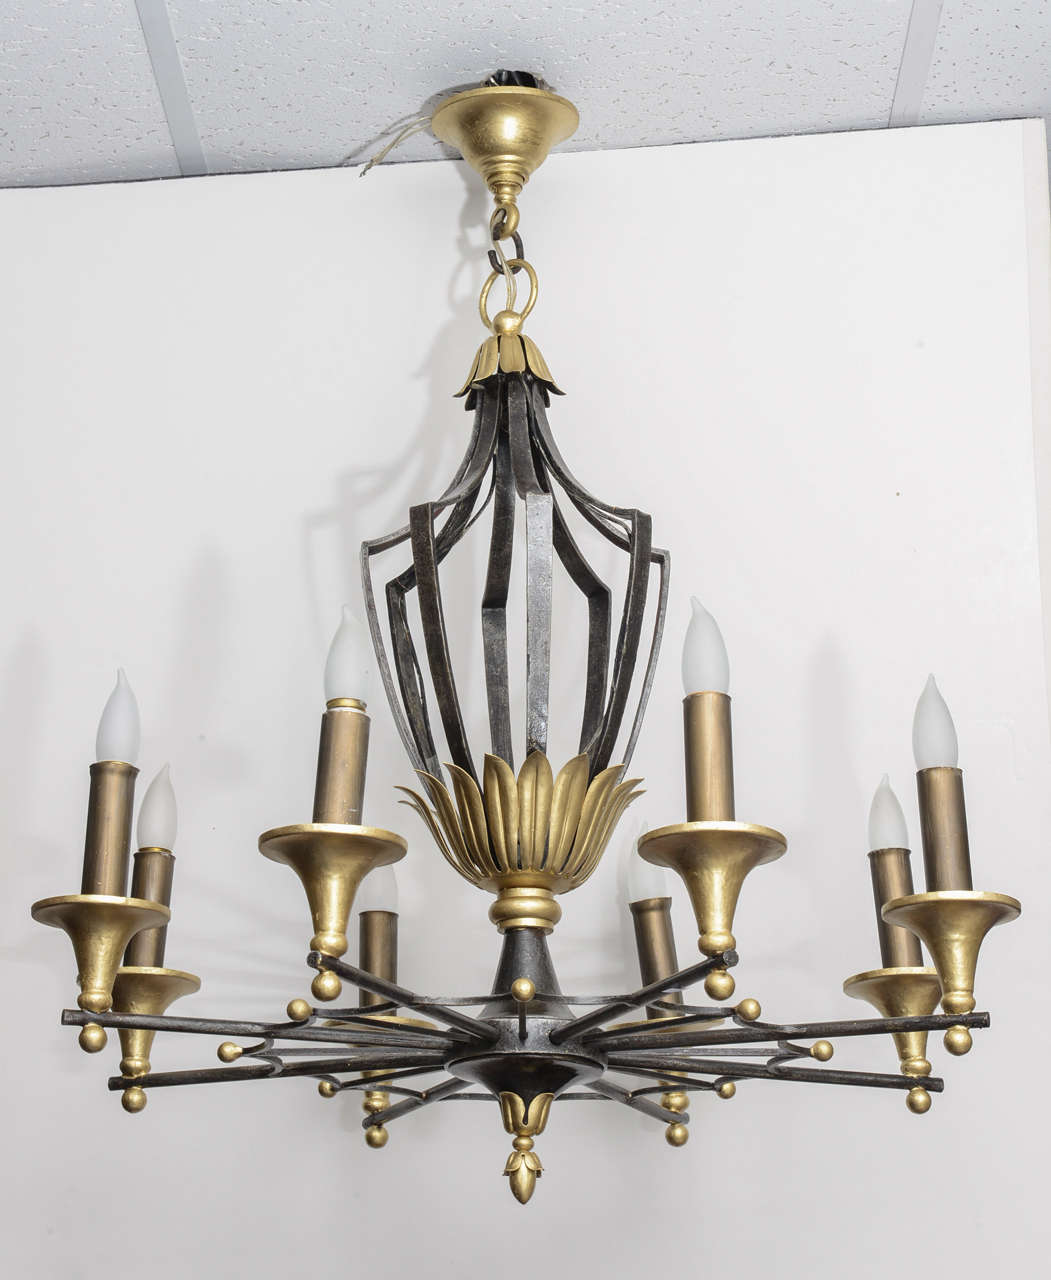 Wrought iron chandelier in the perfect neo classical style. (Circa 1940 )
Very sophisticated design, by a talented iron worker.
16 rays coming from the central part of the piece, sumounted by a vegetal crown supporting a classicalbaluster